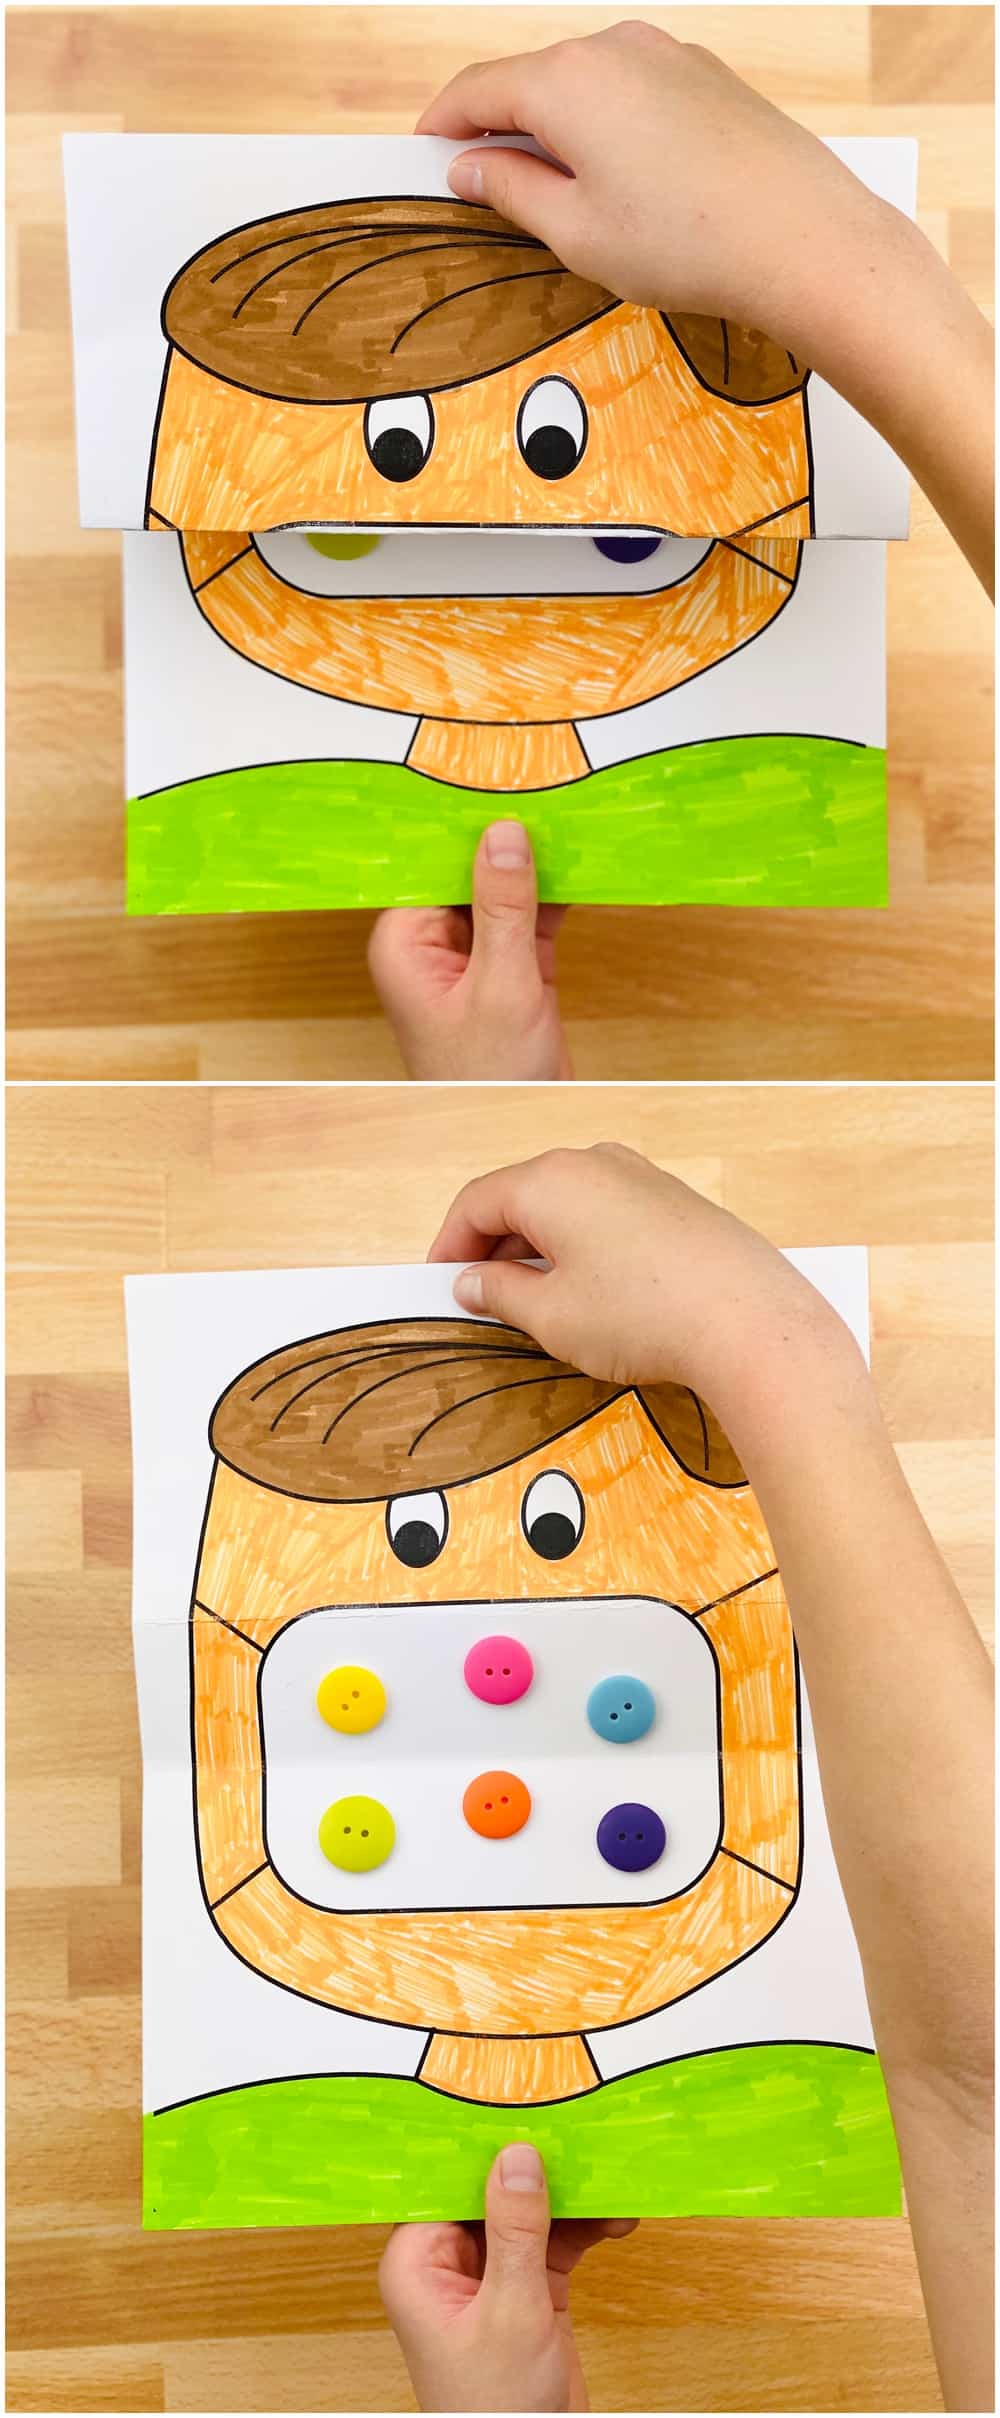 coloring art project for kids, filling in mask to decorate 